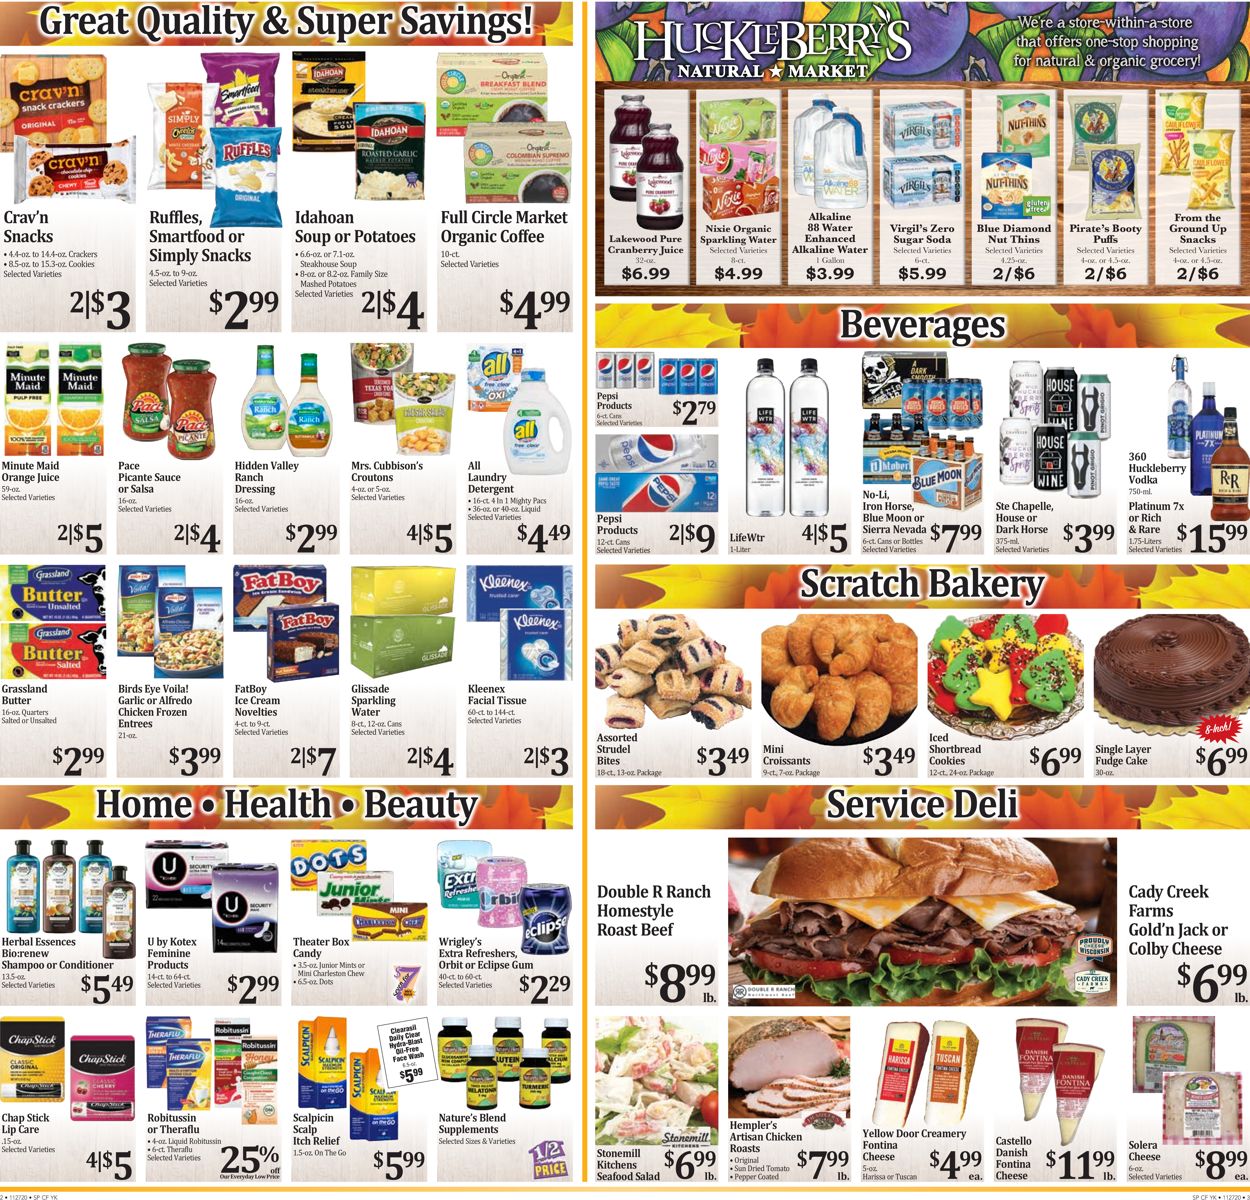 Rosauers Fall Sale 2020 Weekly Ad Circular - valid 11/27-12/01/2020 (Page 2)